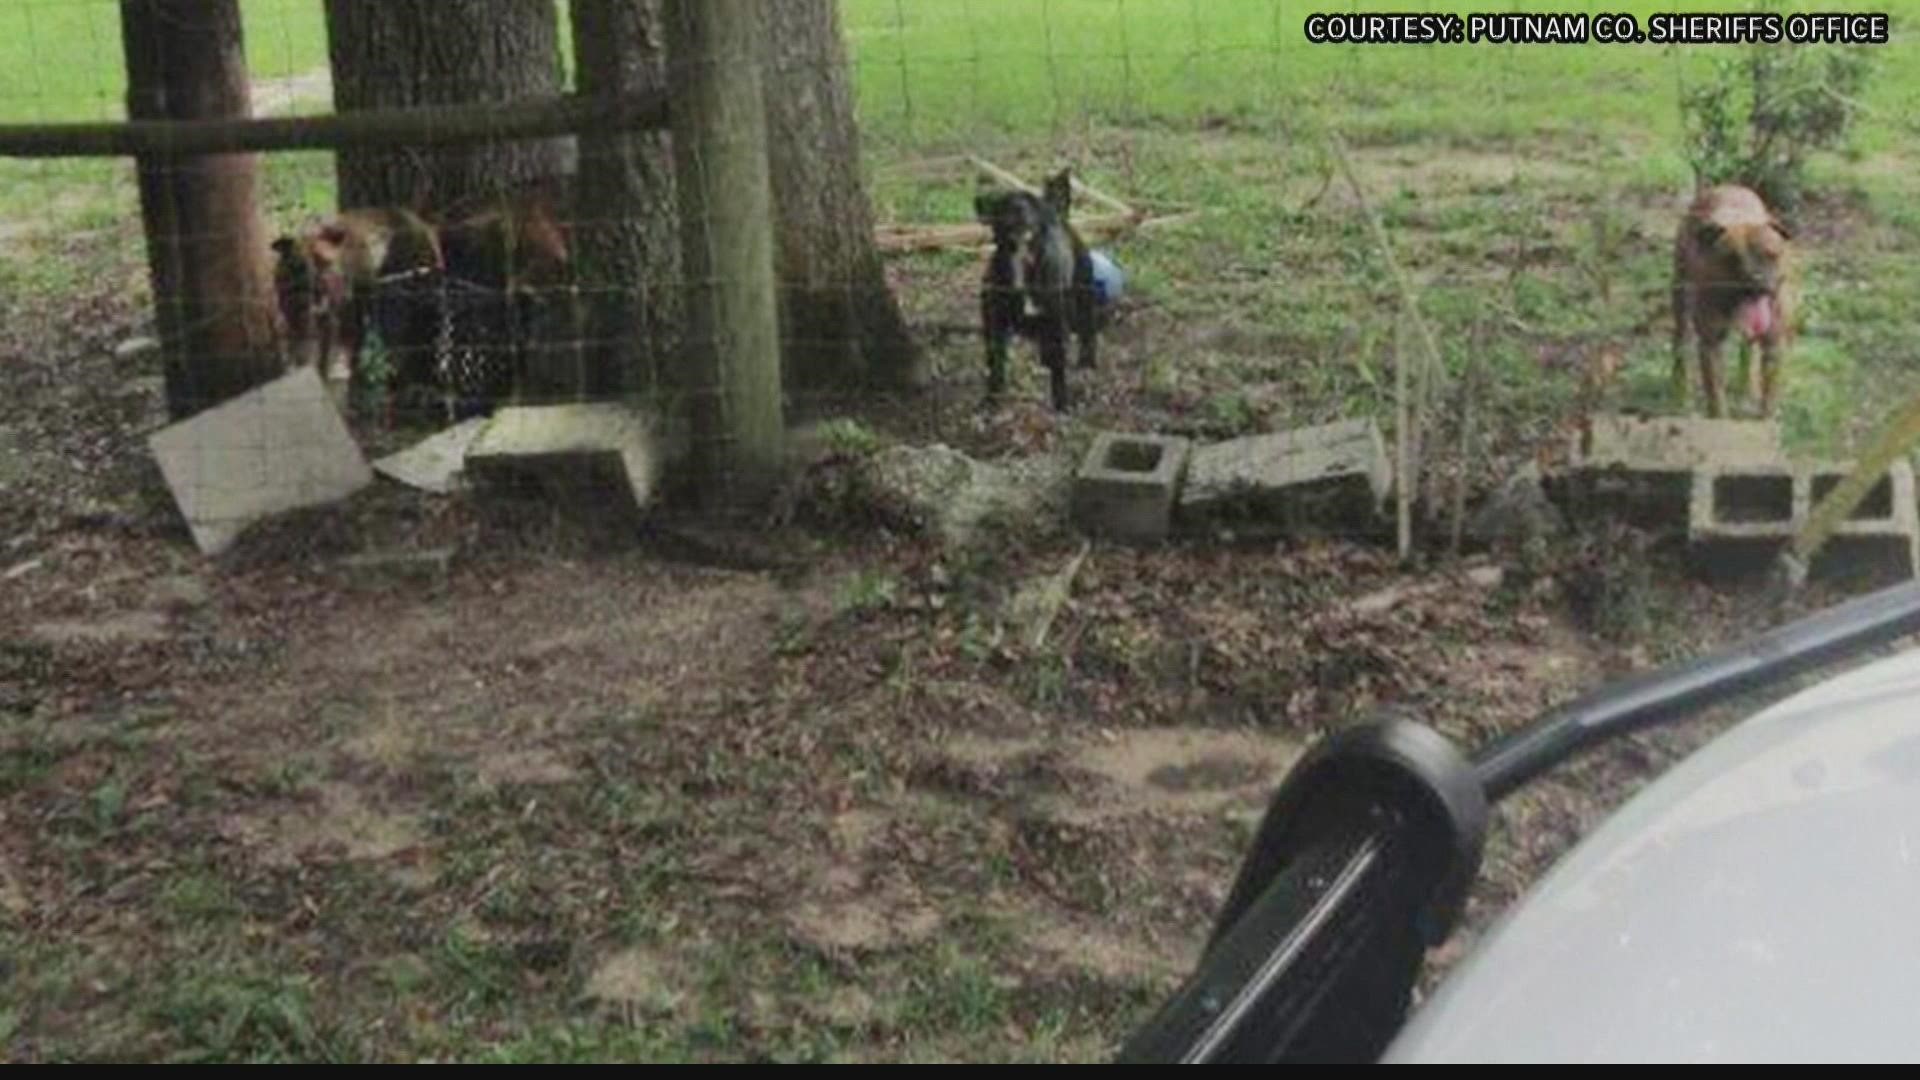 The attack happened Sunday in Interlachen after the dogs busted out of their fenced in yard.